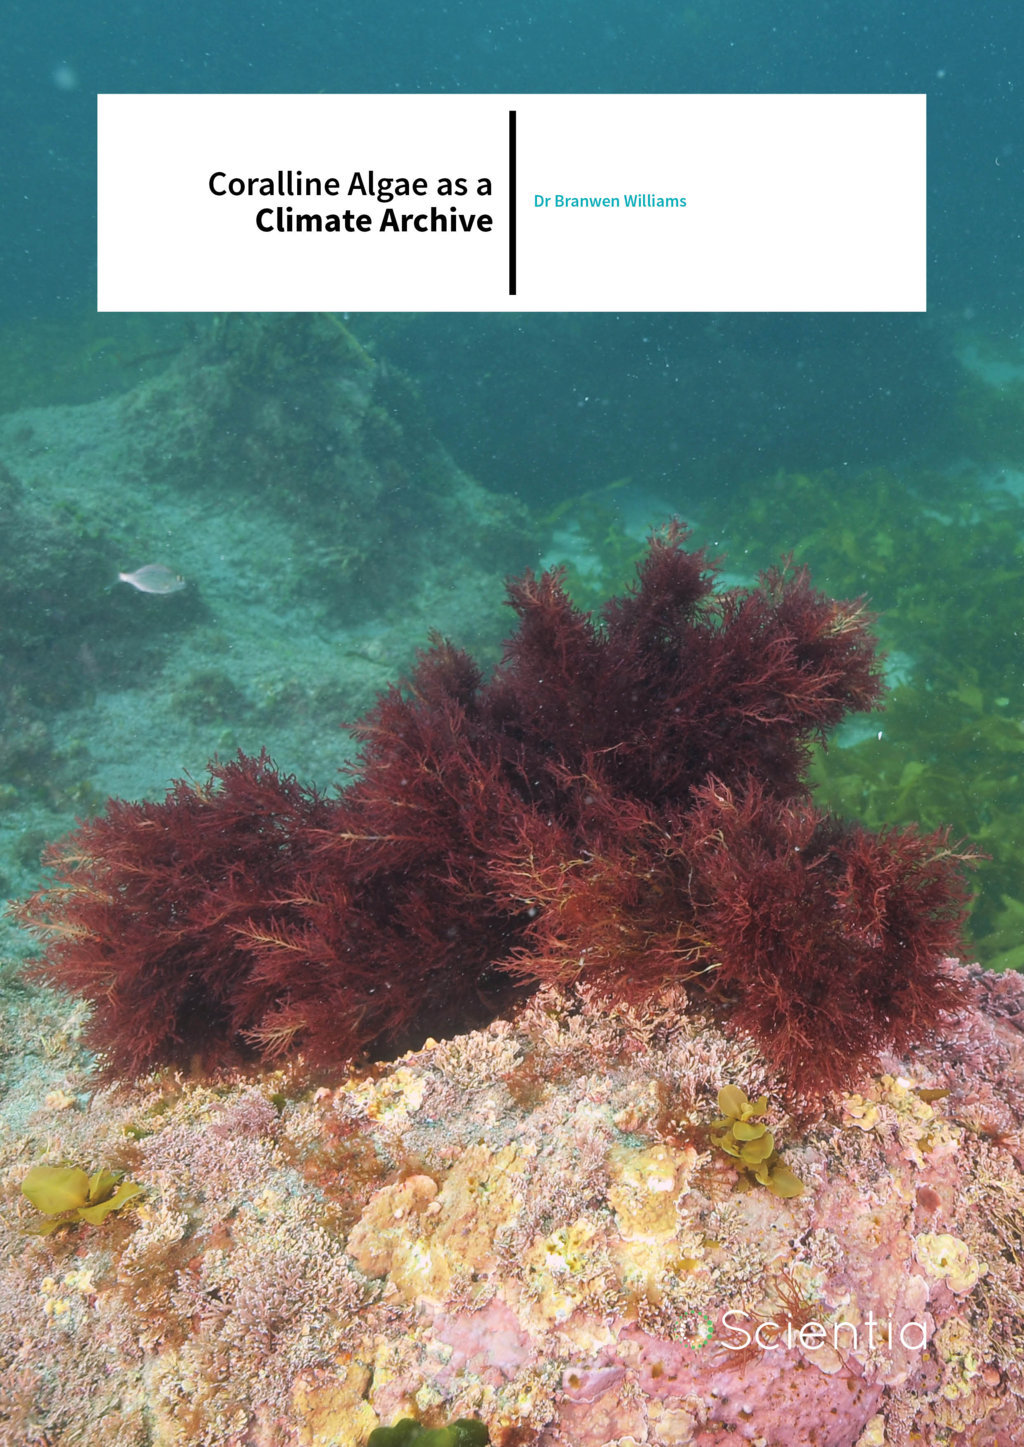 Dr Branwen Williams – Coralline Algae as a Climate Archive